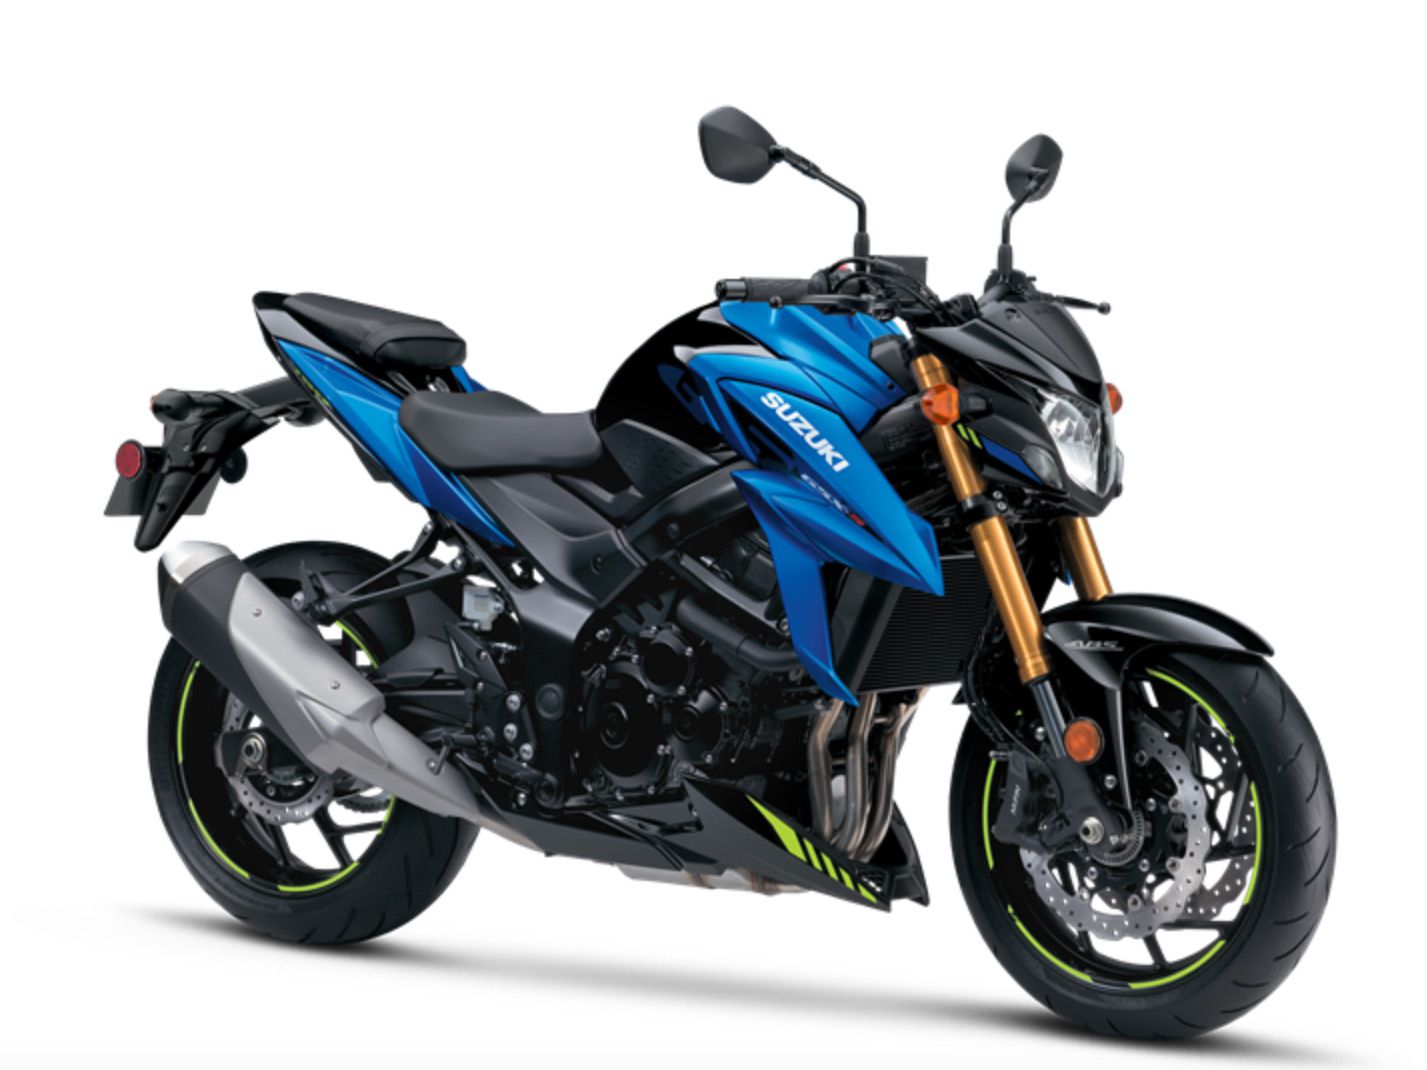 Great power for the price: The Suzuki GSX-S750Z ABS is yours for $8,949 MSRP.